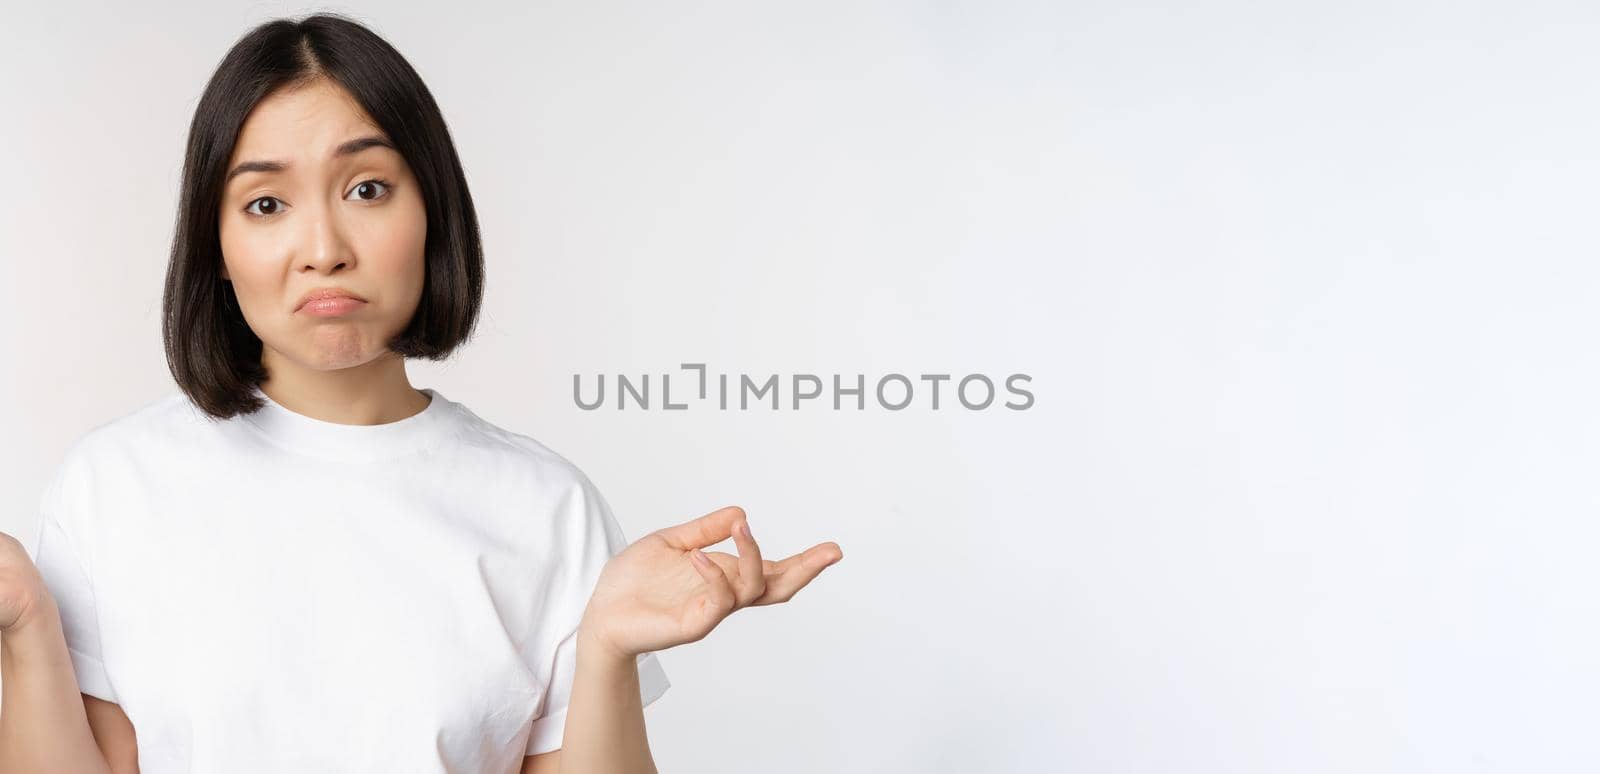 Portrait of confused asian woman shrugging shoulders, looking clueless, puzzled to say, standing over white background. Copy space